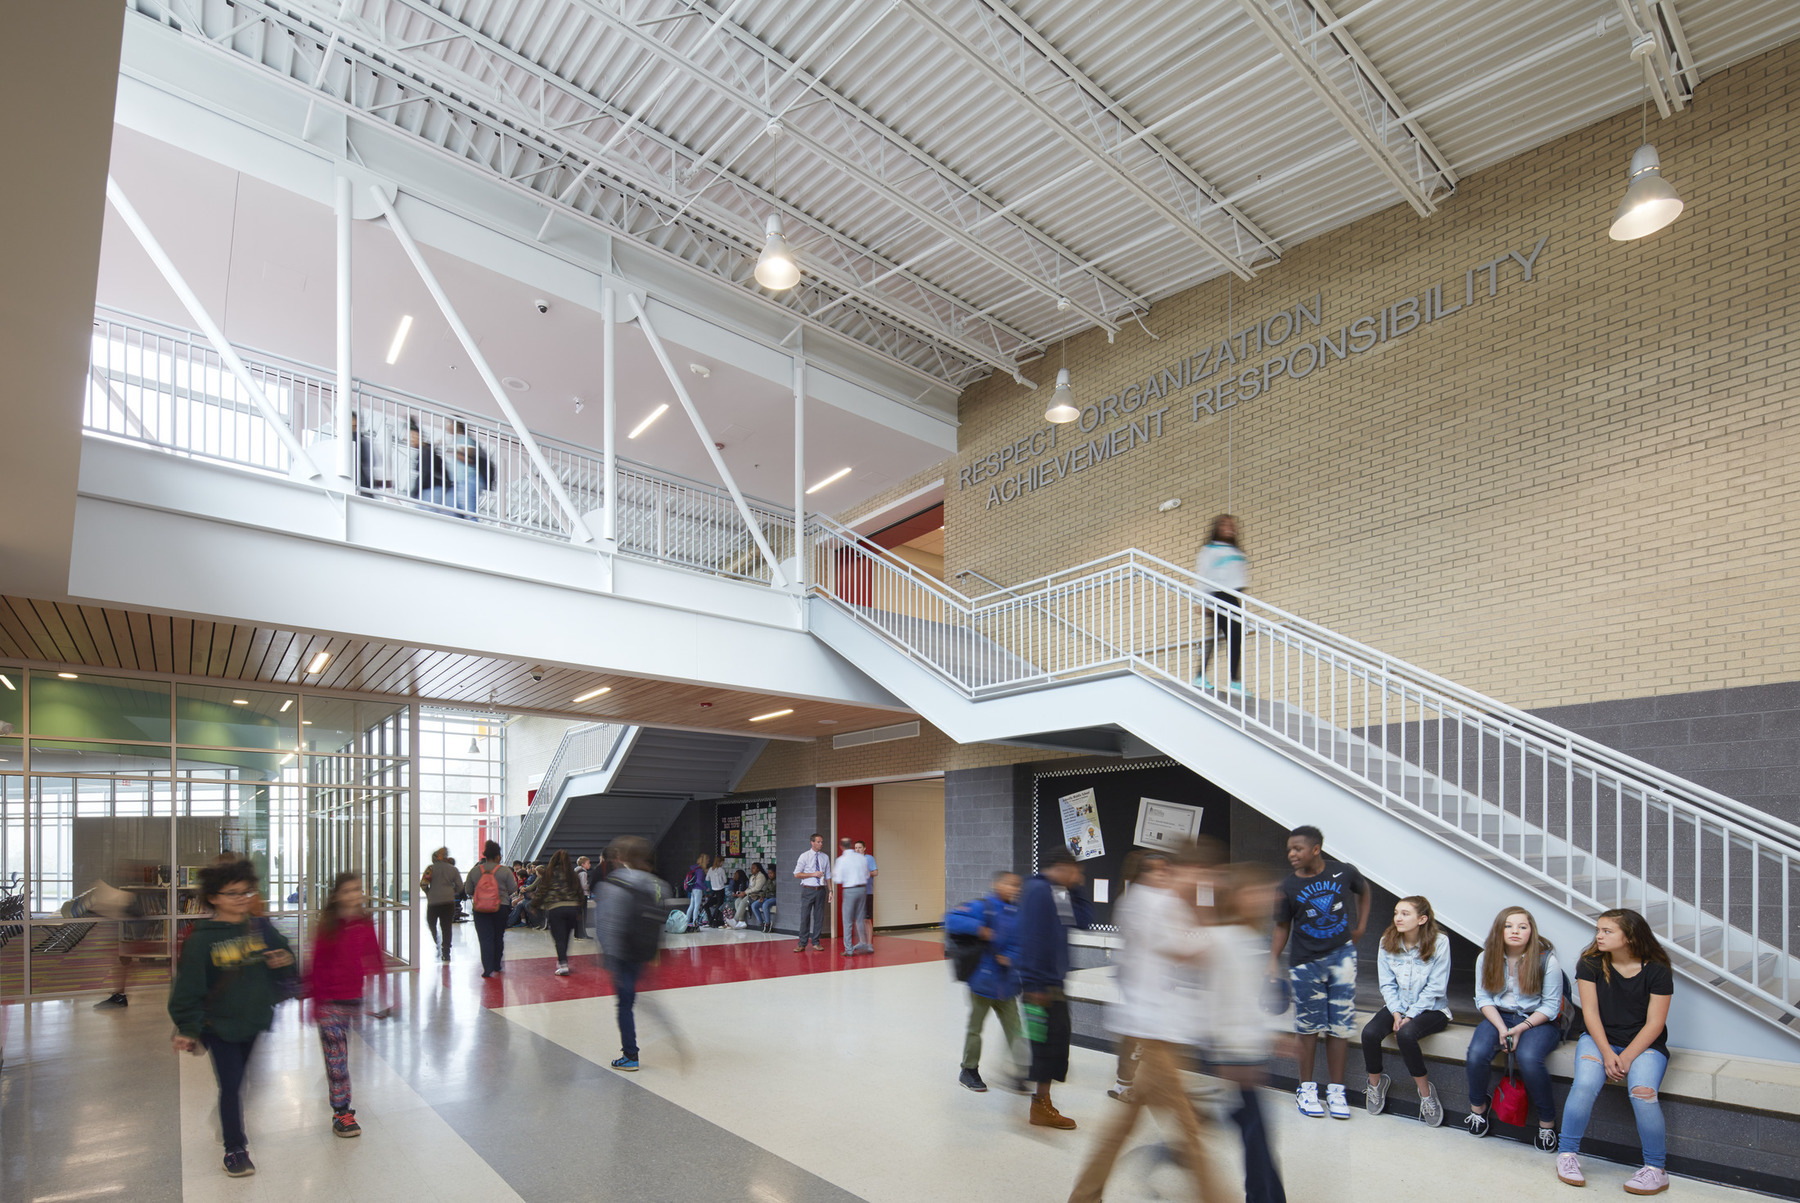 Designing K-12 schools for students and safety